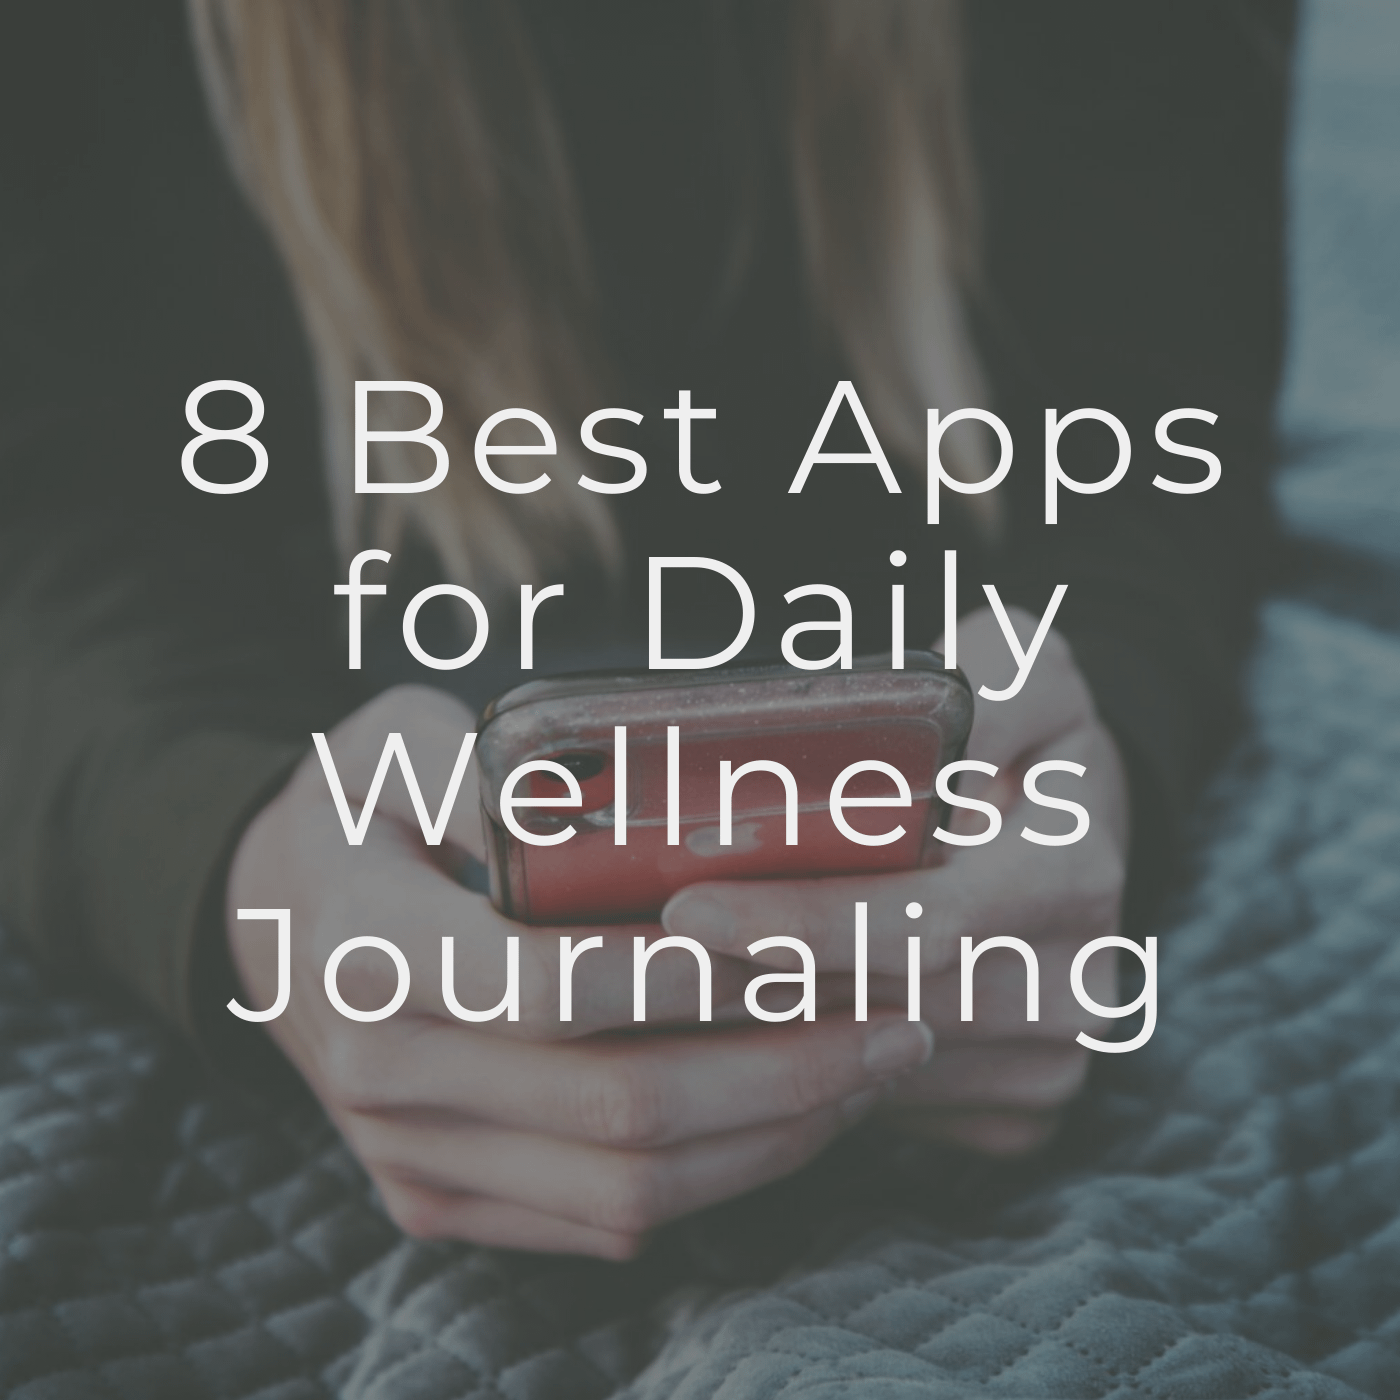 8 Best Apps for Daily Wellness Journaling in 2021